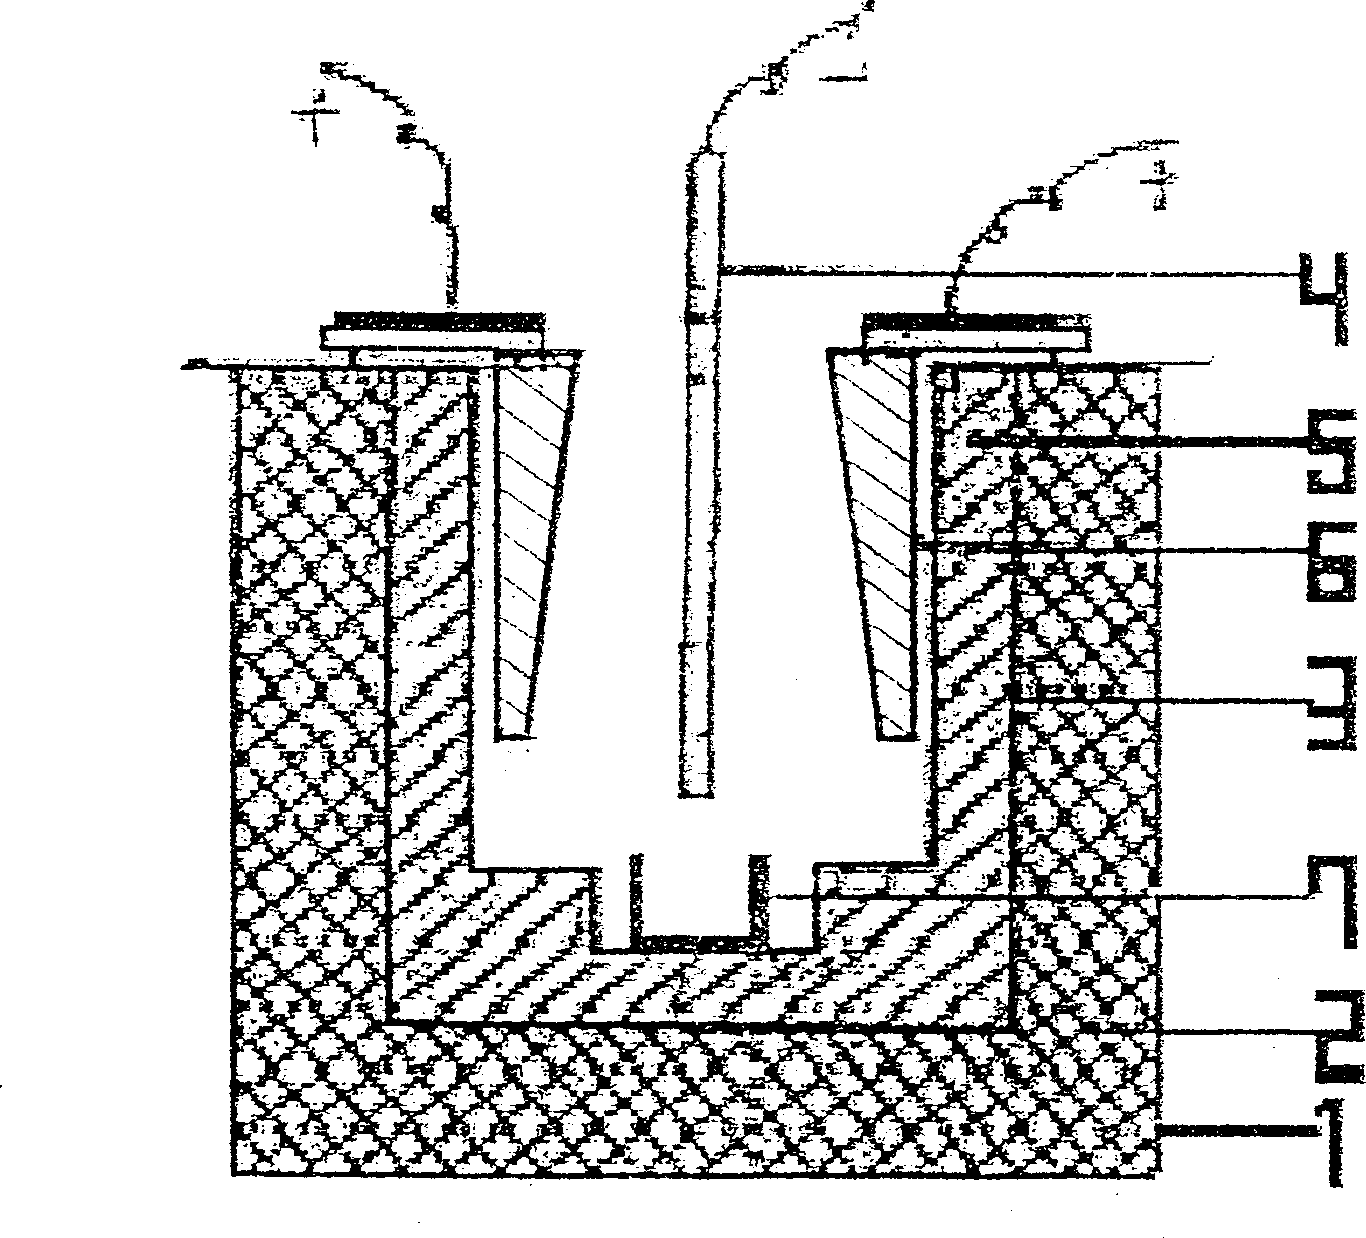 Process for preparing cell-class mischmetal by fused salt electrolysis process and device therefor